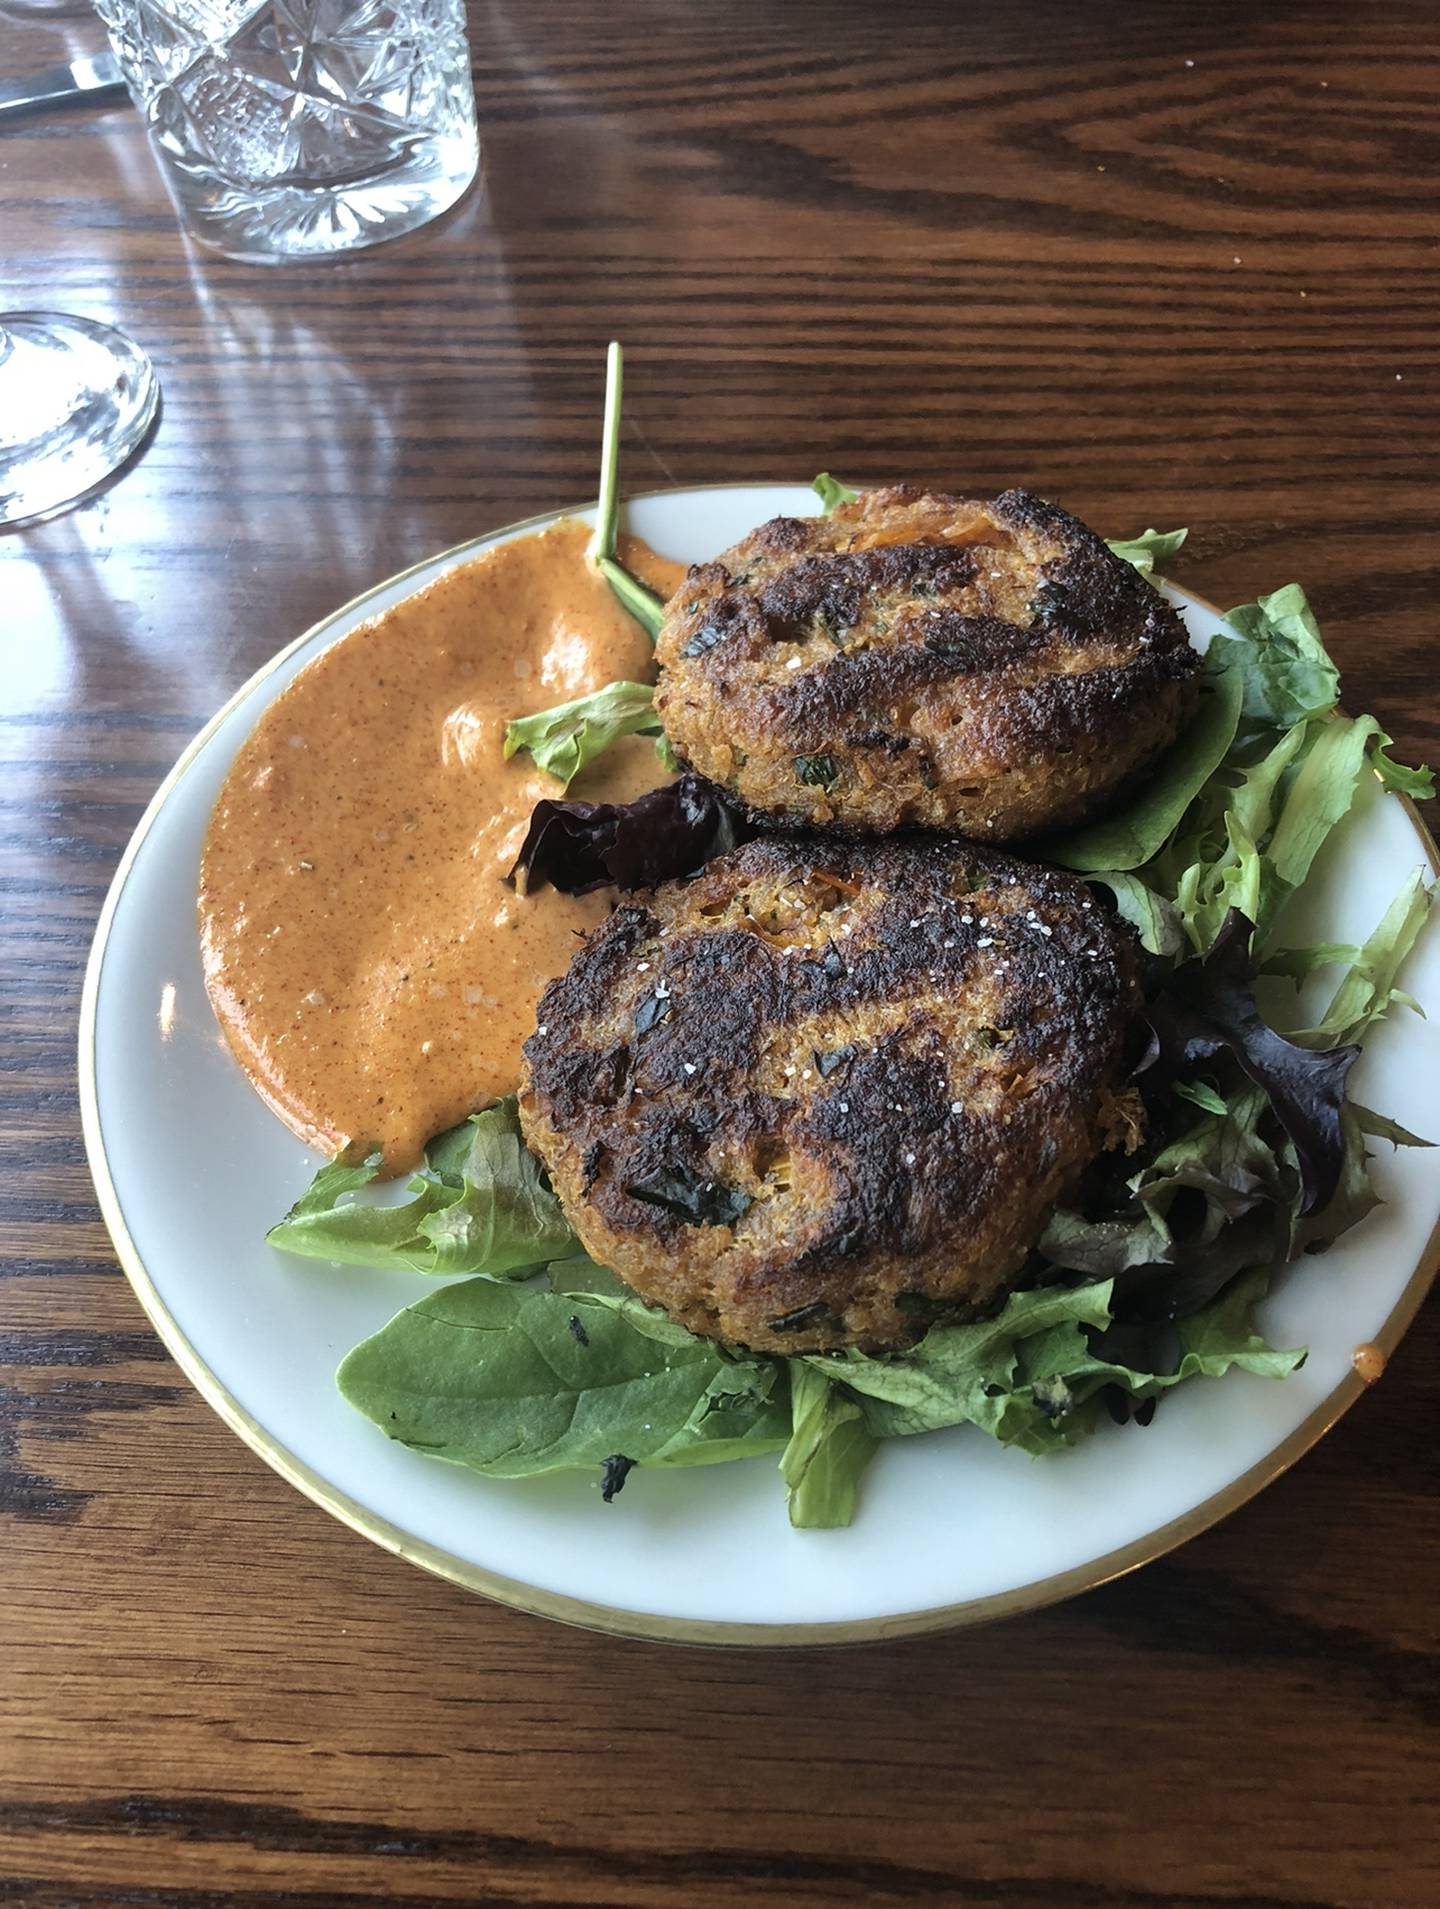 Fresh crab cakes from Bleuroot paired will with the sweet potato fries.